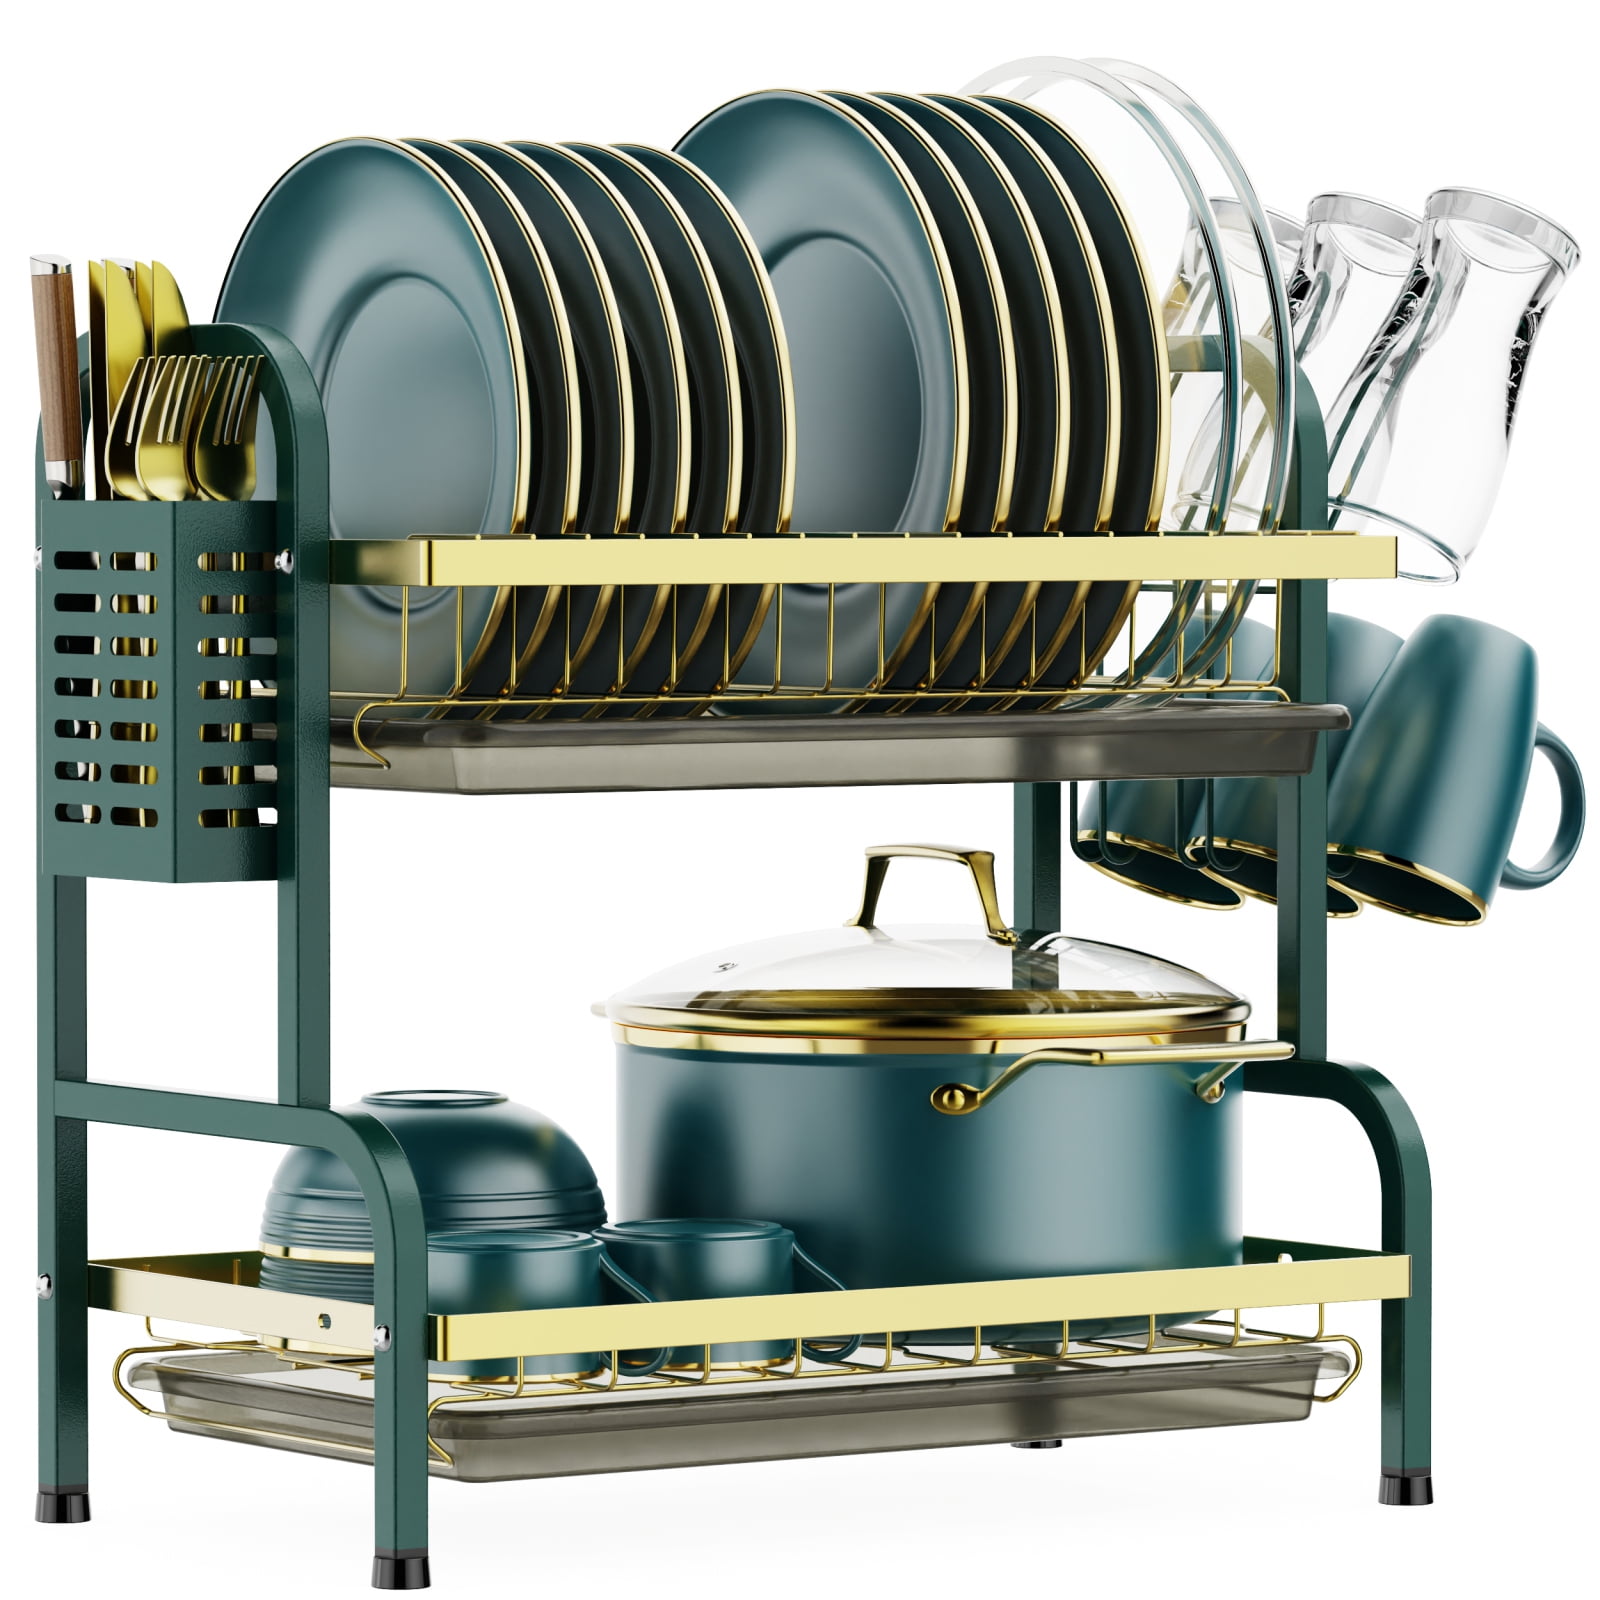 Great double decker dish rack 👍🏼 #myfavoriteproducts